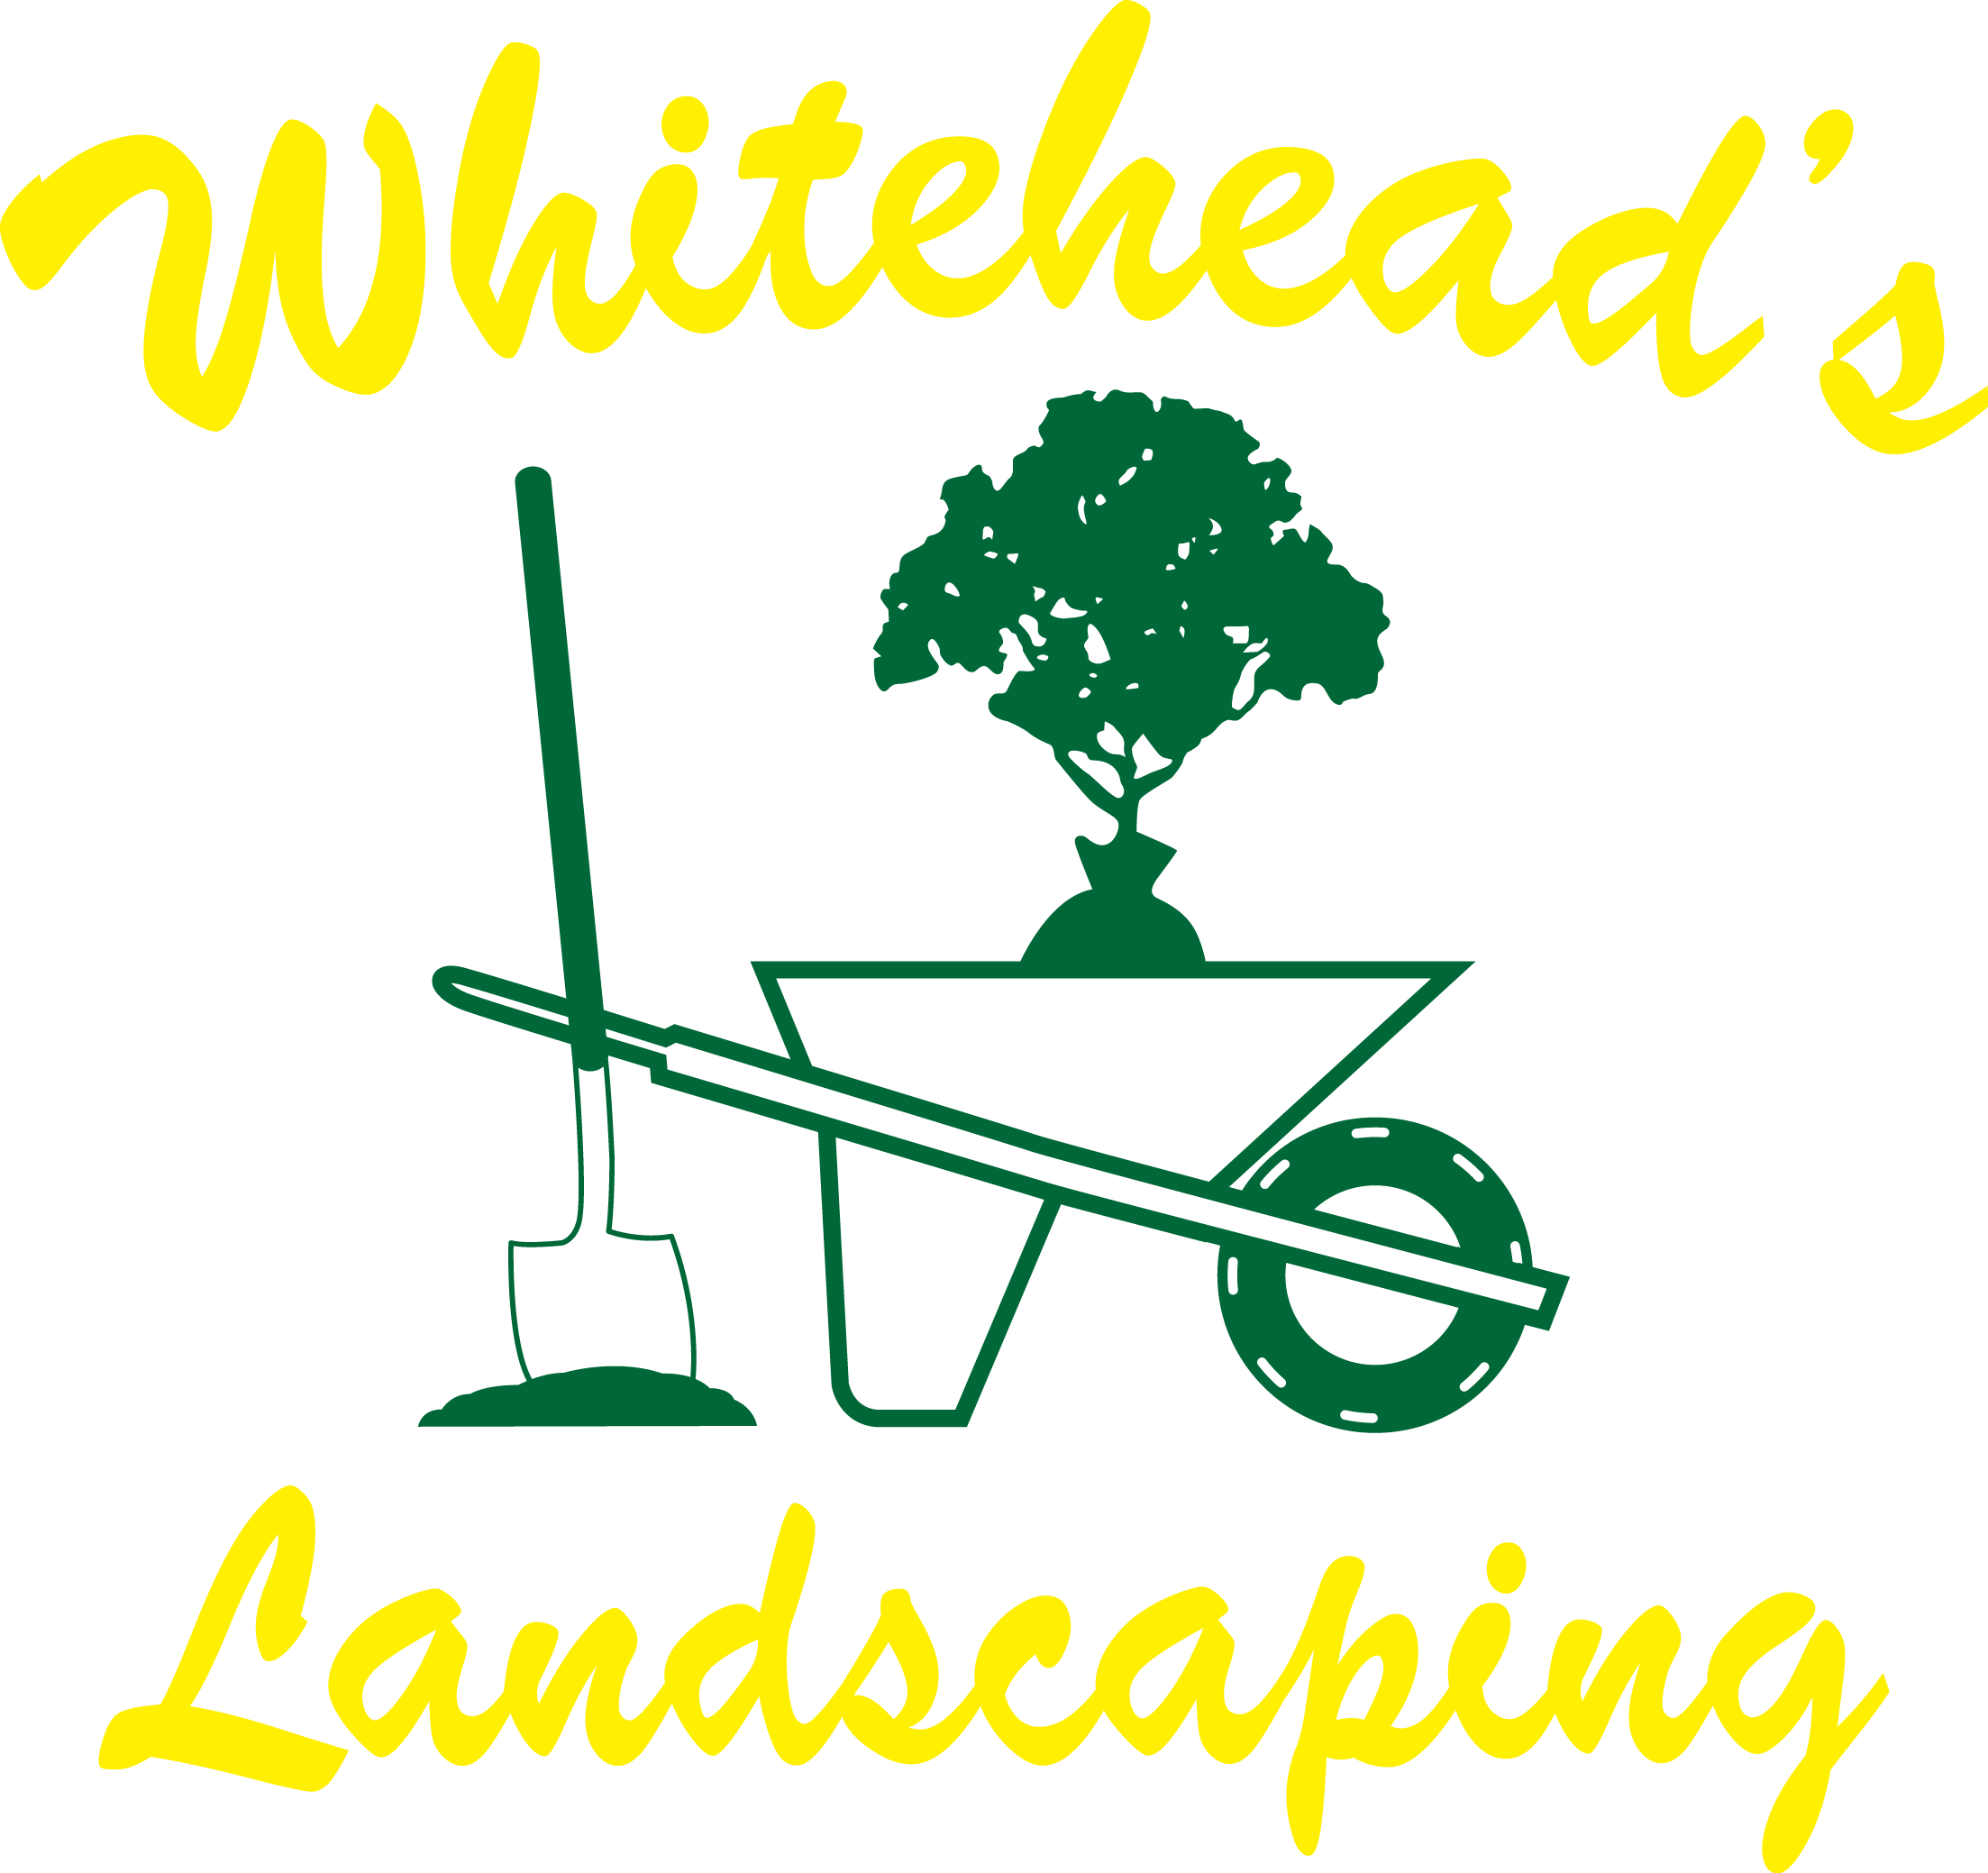 Whitehead - Landscaping (2206x2078)